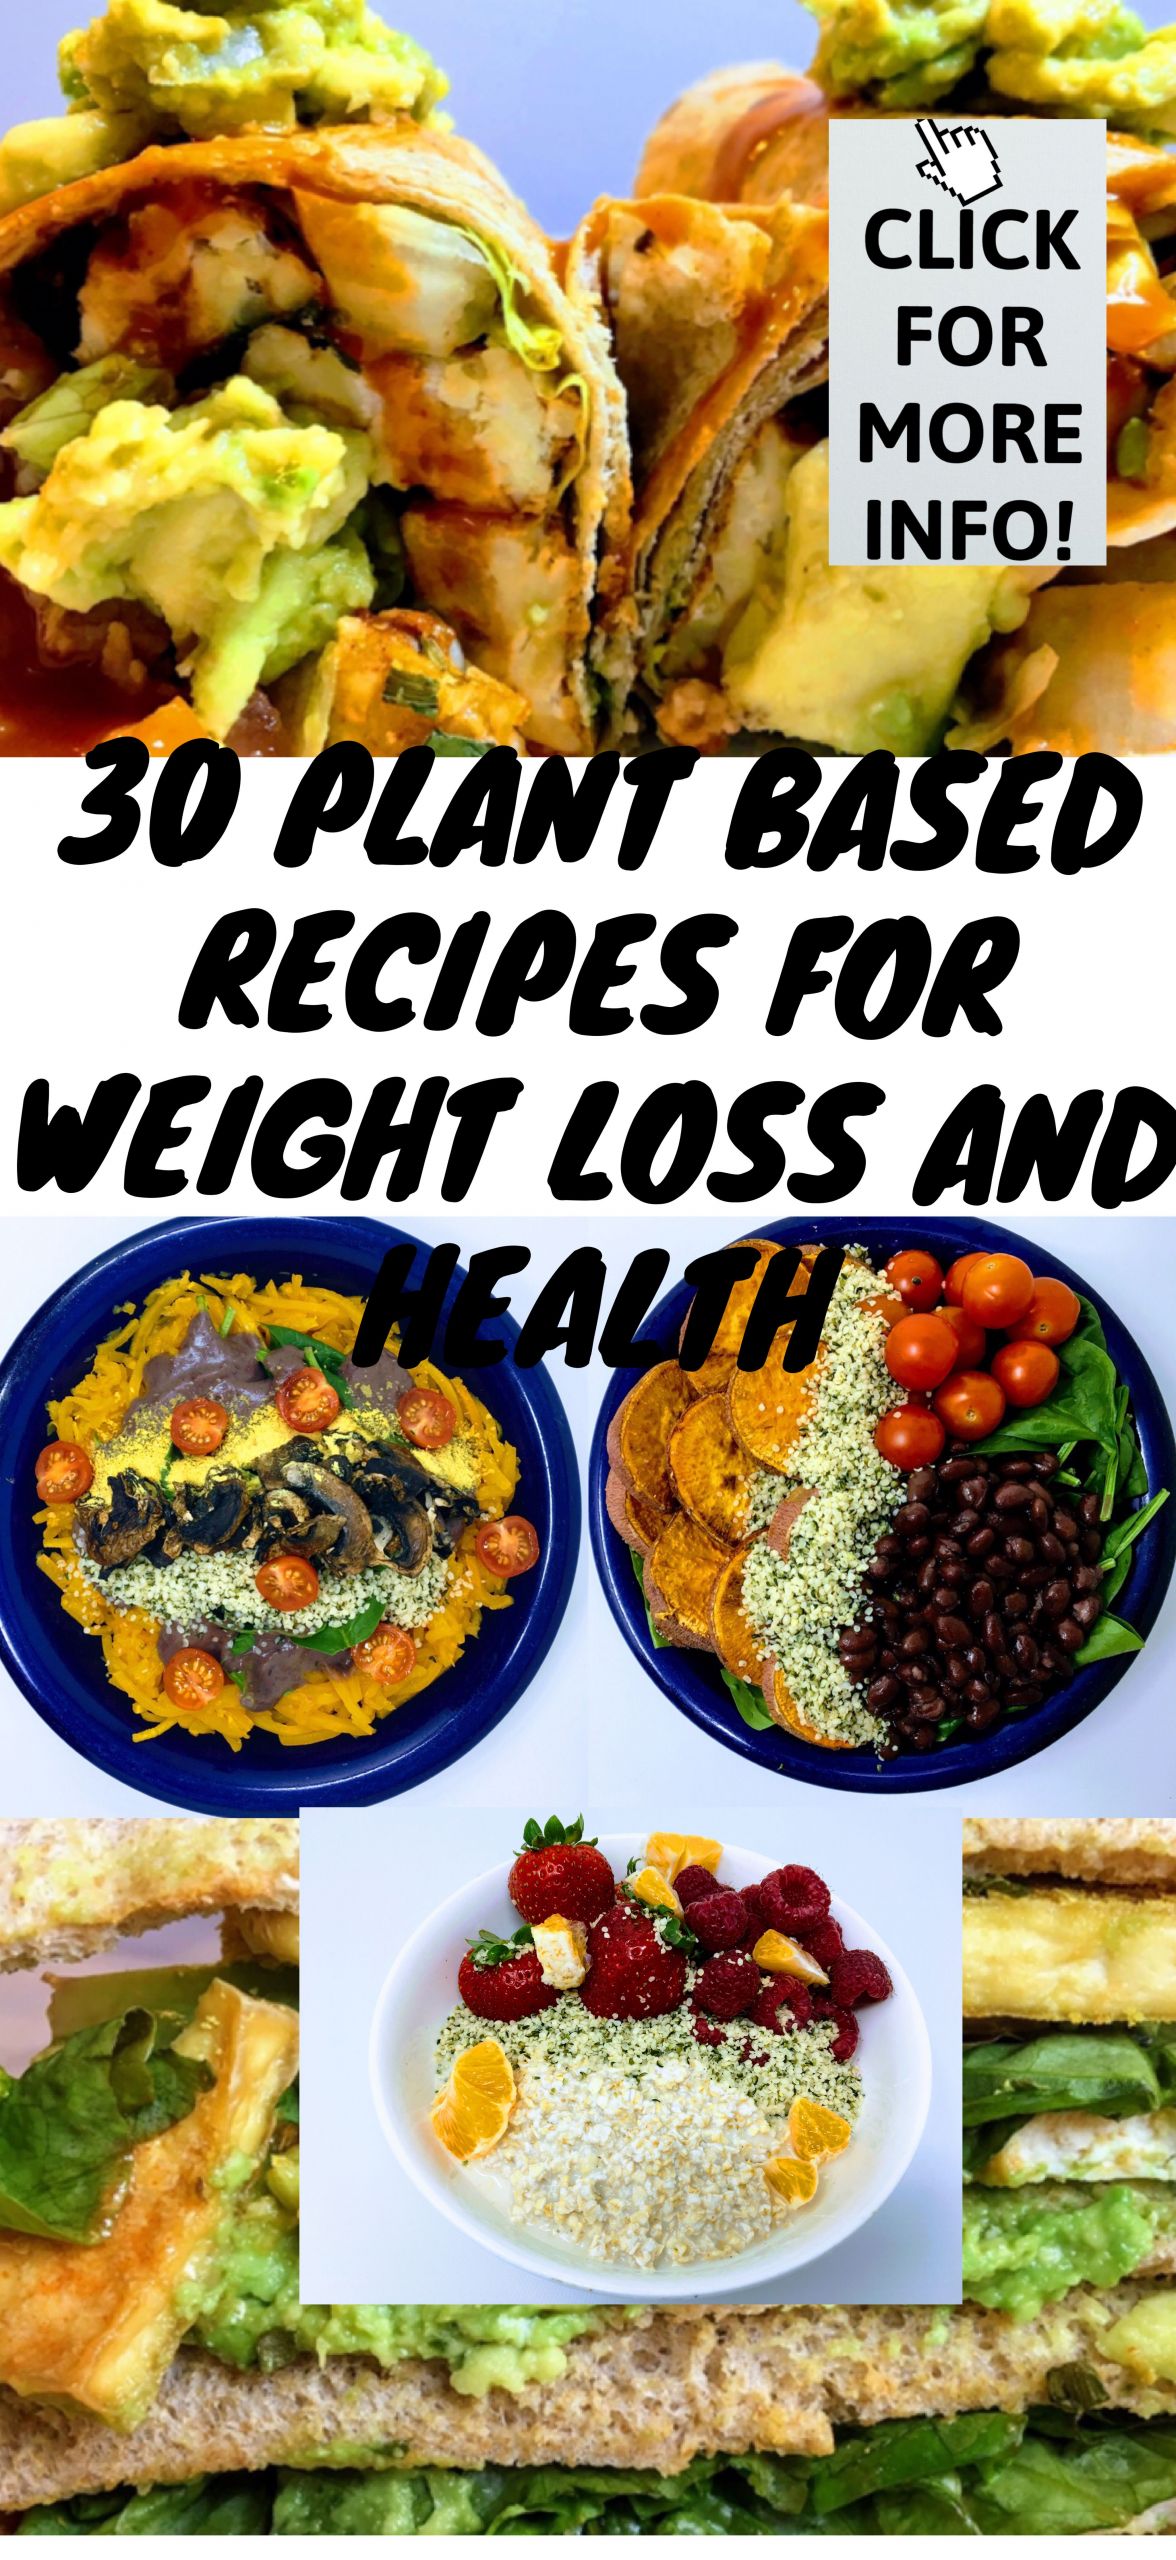 Plant Based Recipes For Weight Loss
 Pin on weight loss